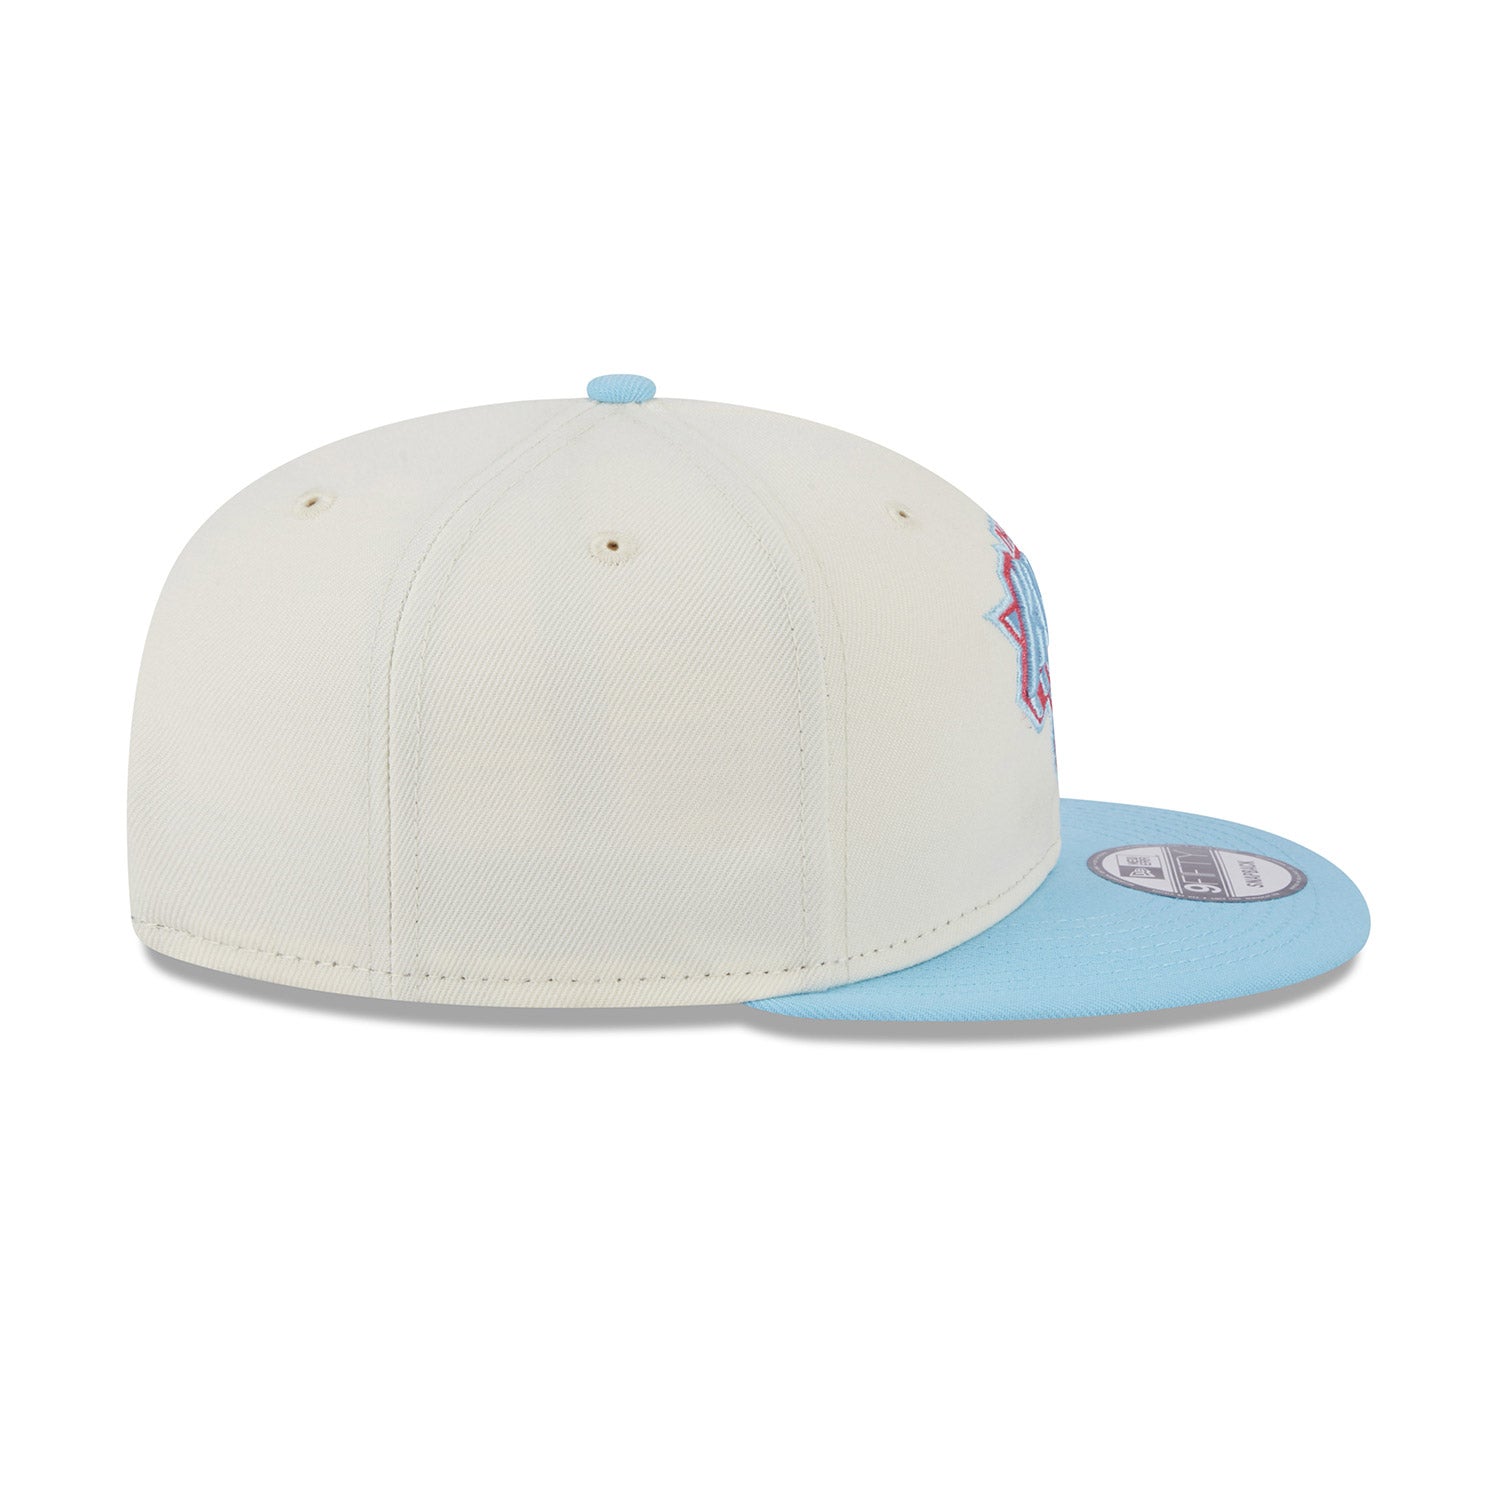 New Era Knicks Colorpack Two Tone Snapback Chrome/Light Blue Hat In White & Blue - Right Side View